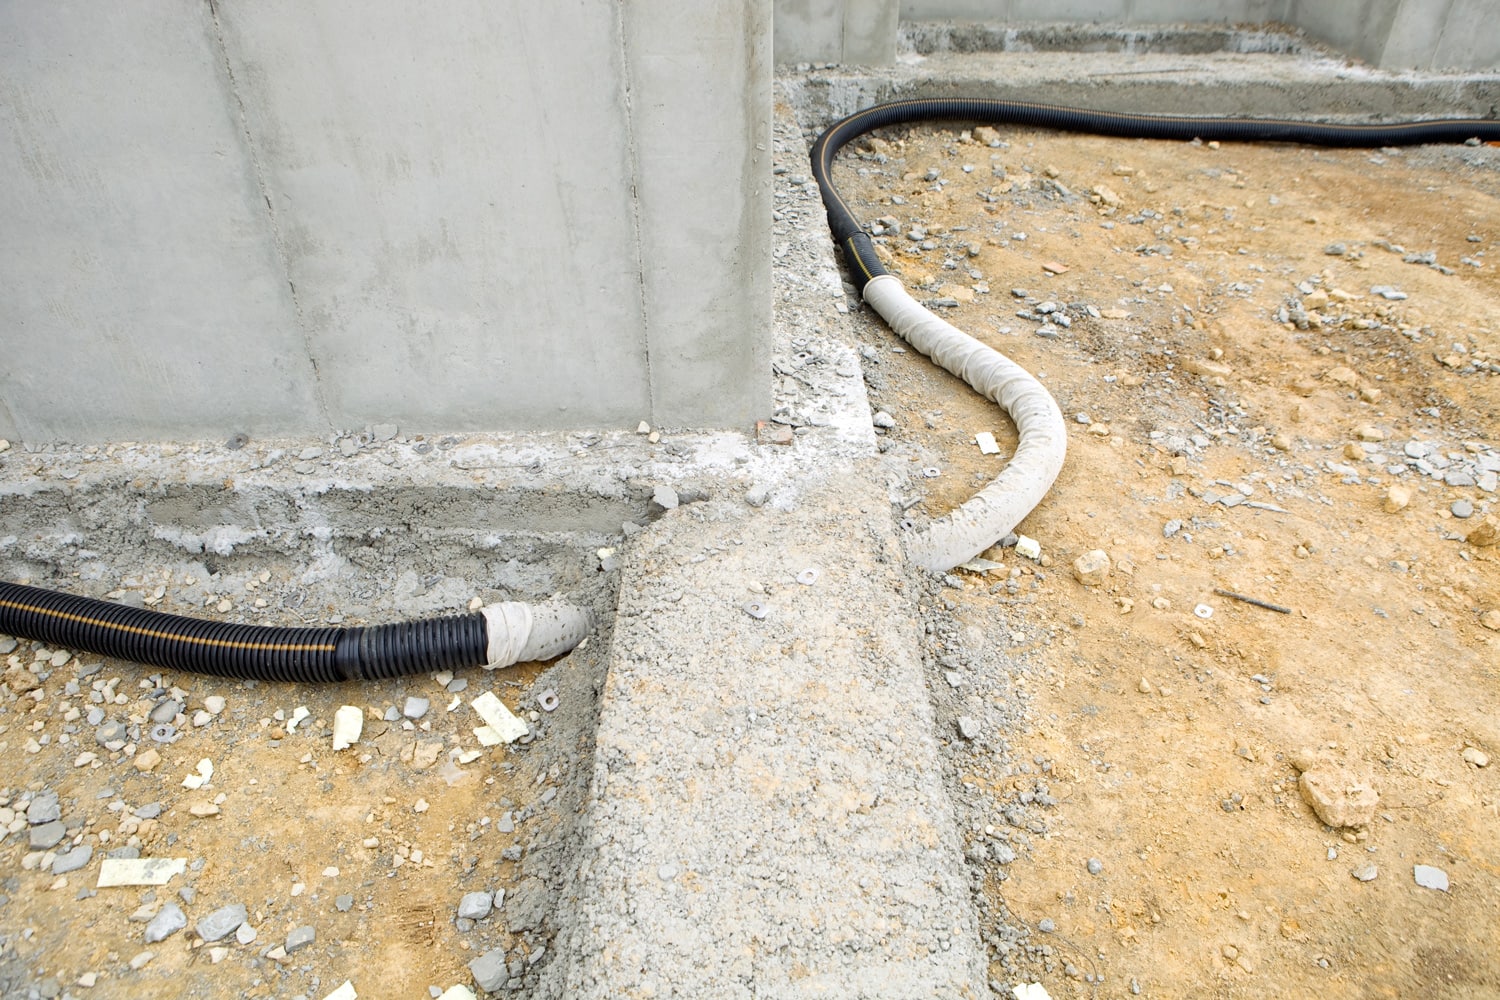 This image shows the initial pipe component of a sub-slab radon mitigation system. This is an active system which will include a fan to depressurize the area below the basement floor. The drain tile (pipe) will be covered with rock, which will be covered with a membrane and then a concrete slab will be poured. The pipe runs through a concrete footing for a supporting wall and the surrounding walls are poured concrete